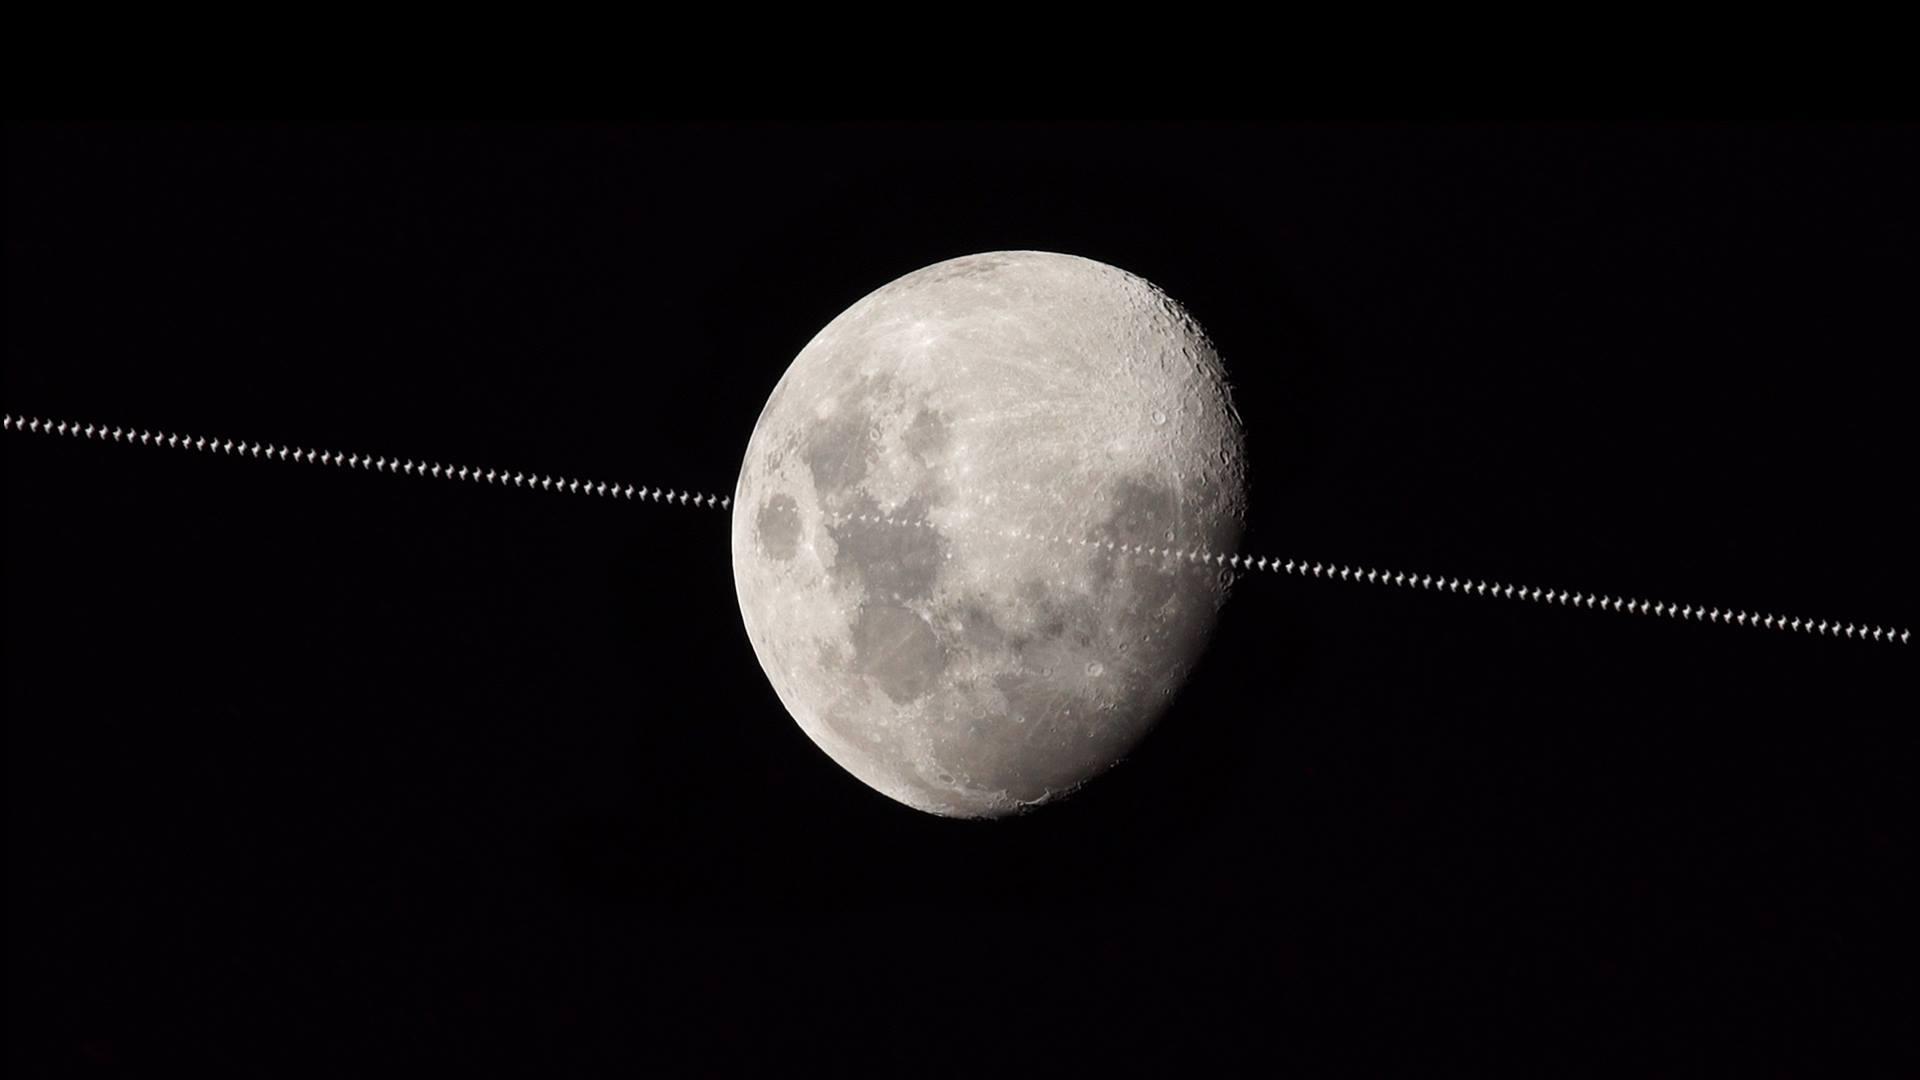 ISS crosses the moon's face. Today's Image